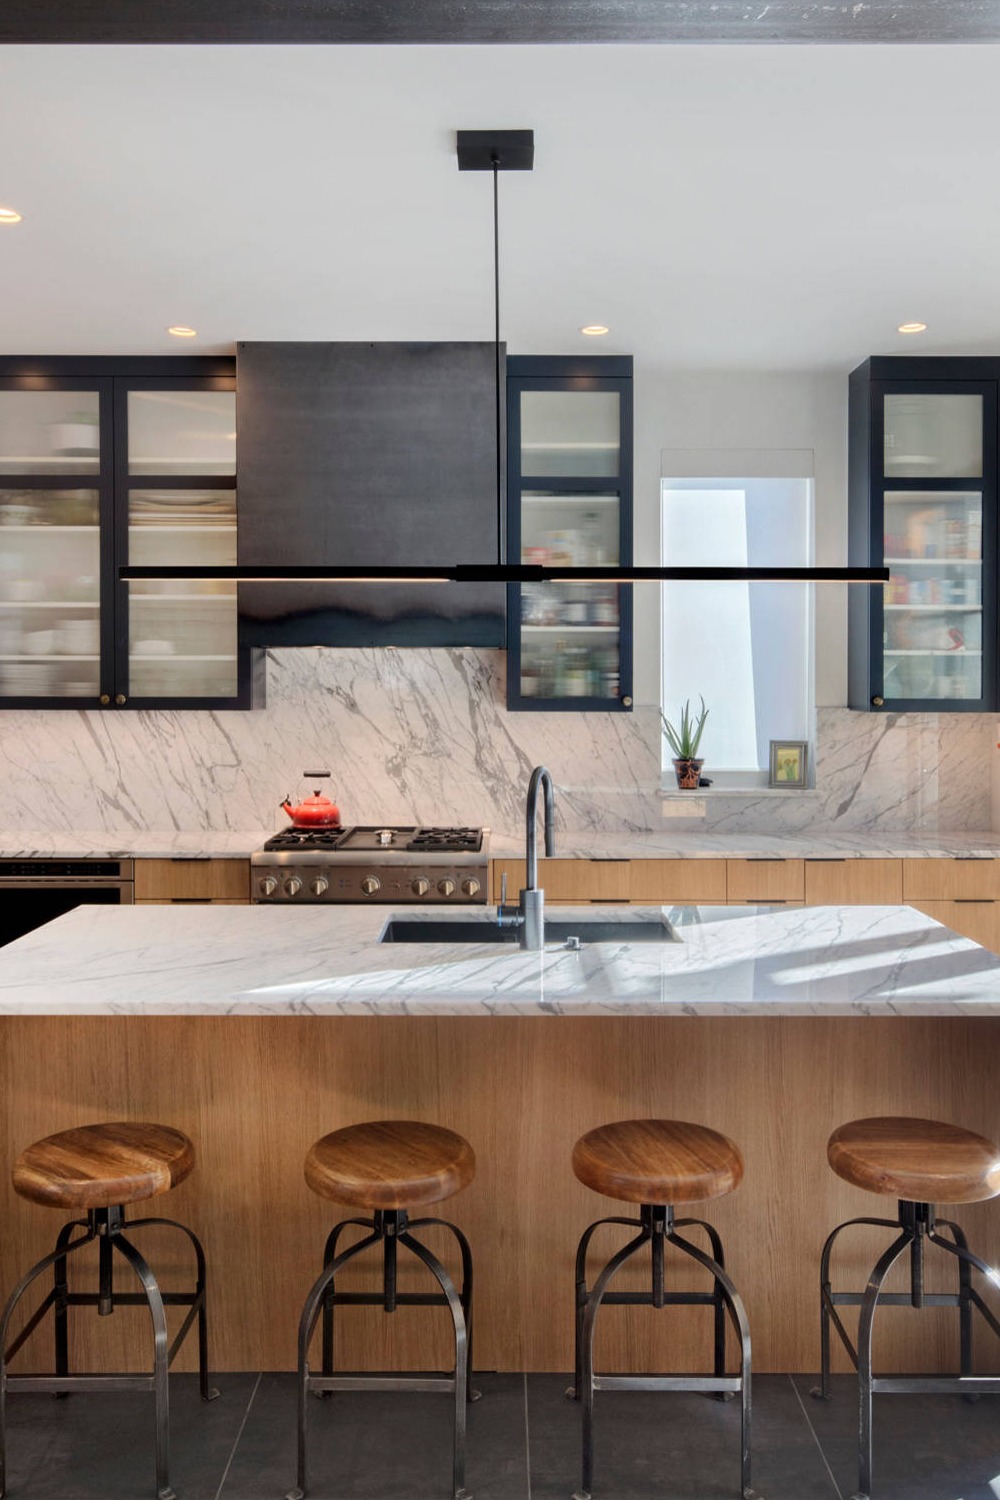 Marble Backsplash Black And White Island Texture Light Cabinetry Marble Countertop